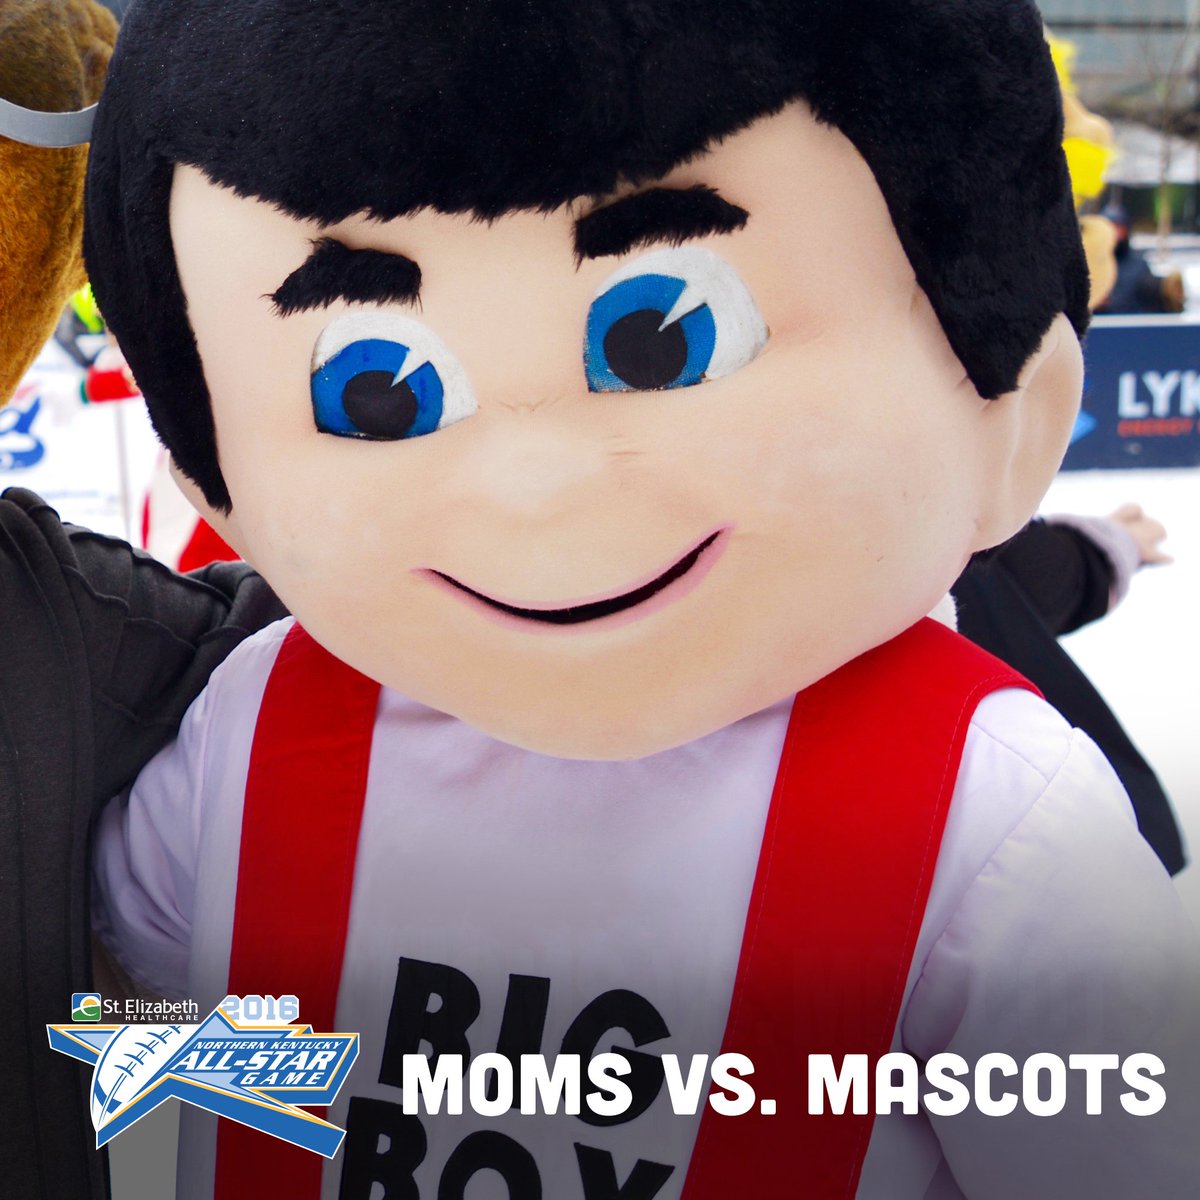 Don’t miss Moms vs. Mascots during halftime! Make sure to enter to win free tickets: woobox.com/qkwdcy